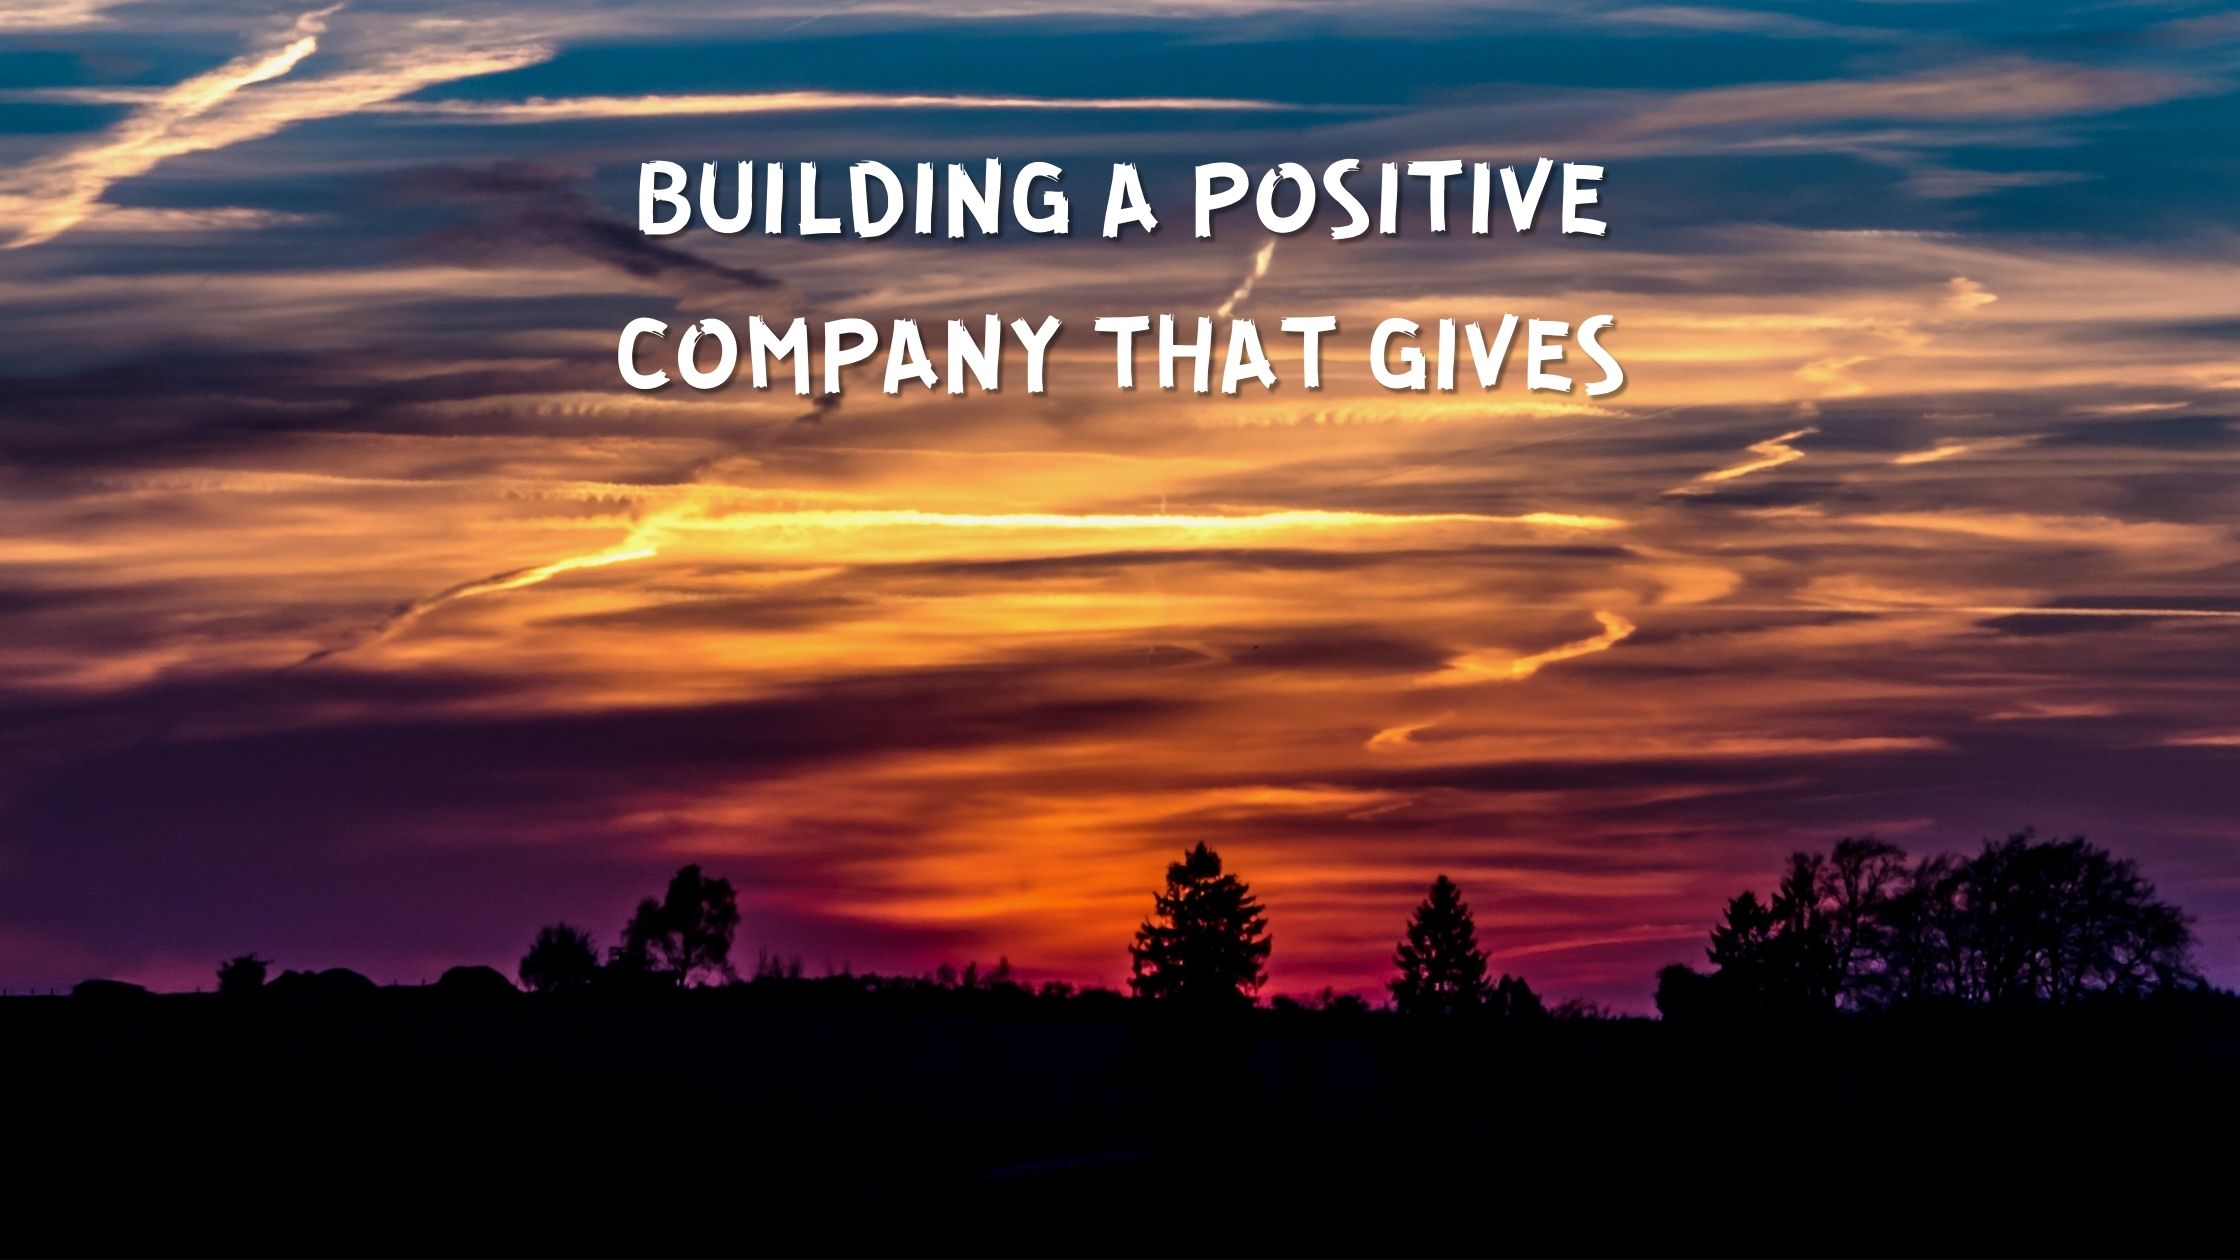 Building a Positive Company that Gives